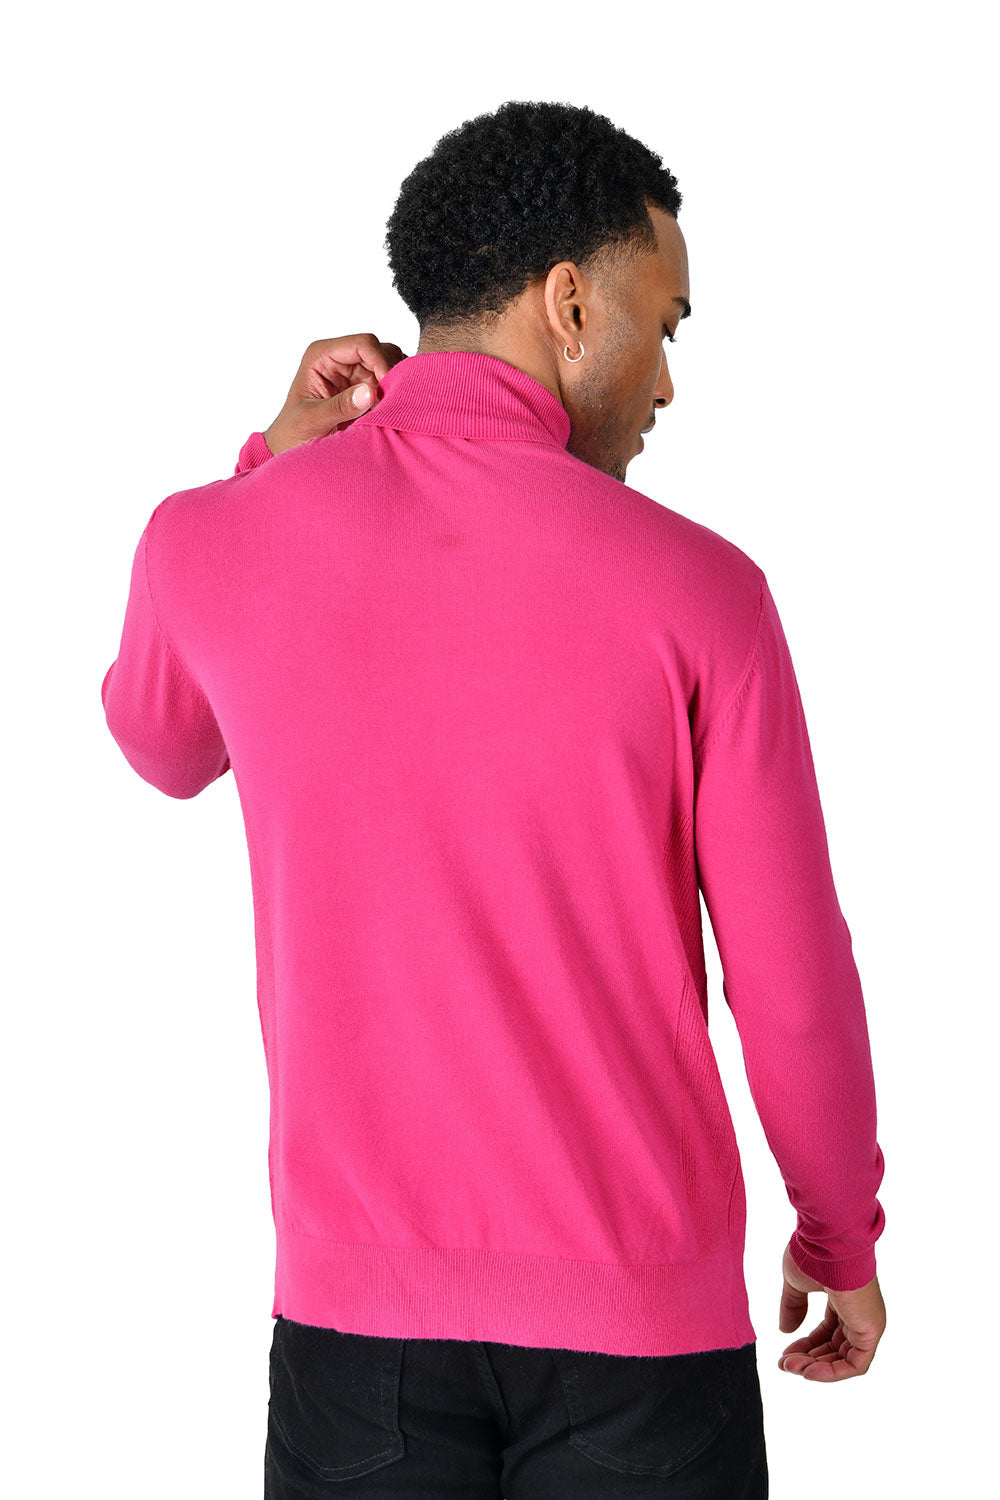 Men's Turtleneck Ribbed Solid Color Basic Sweater LS2100 Fuchsia